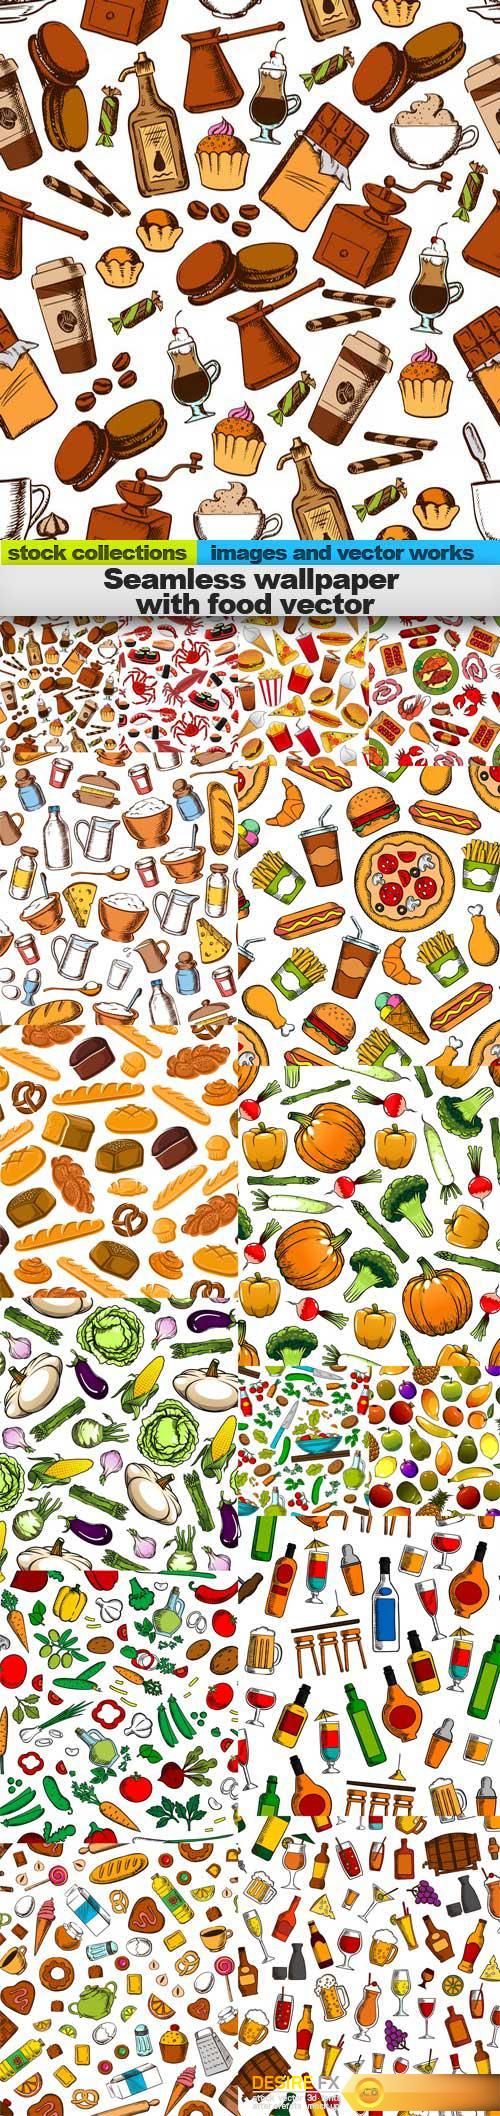 Seamless wallpaper with food vector, 15 x EPS